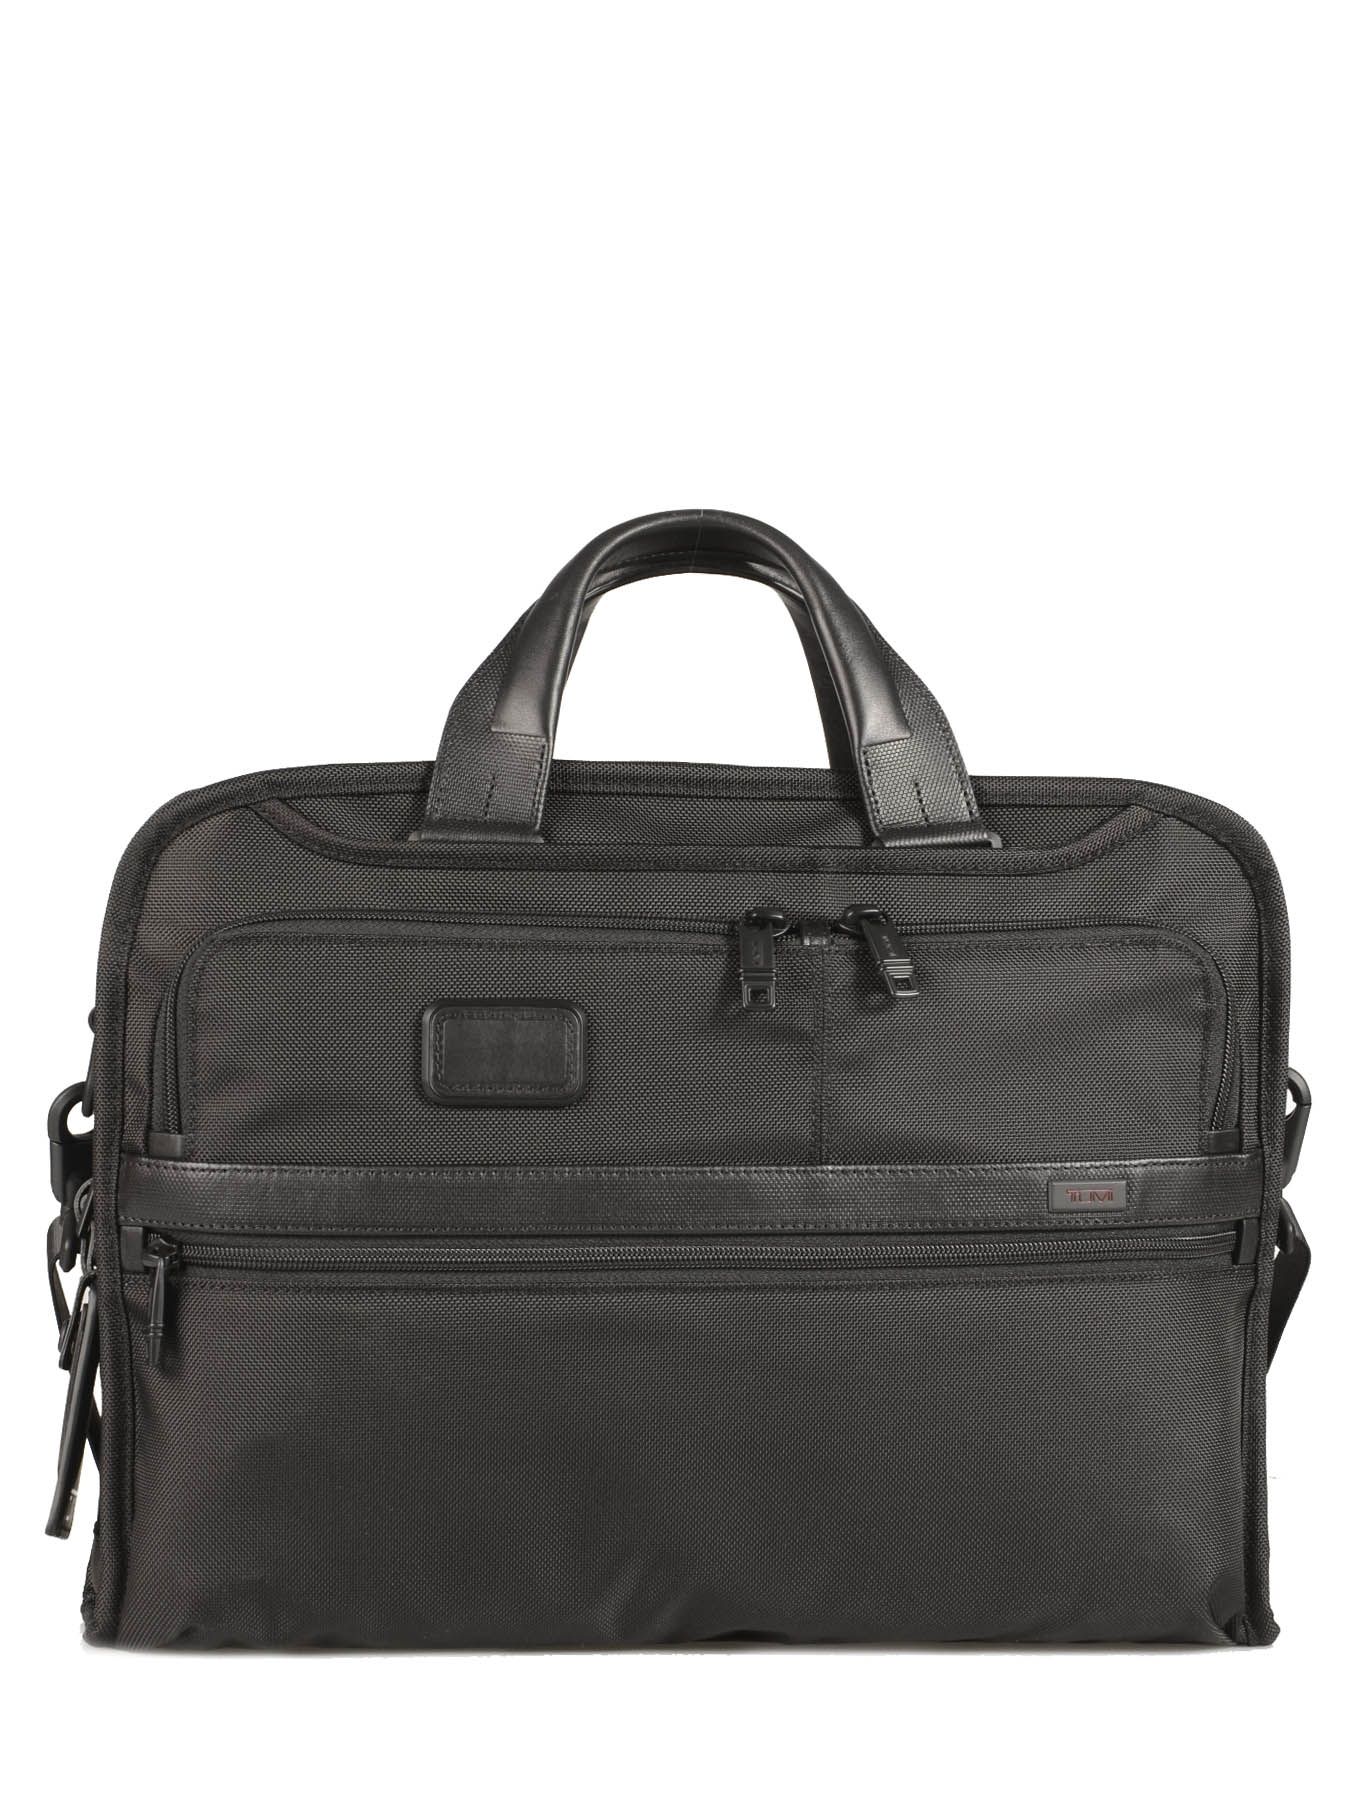 Tumi Briefcase DH.26108 - free shipping available